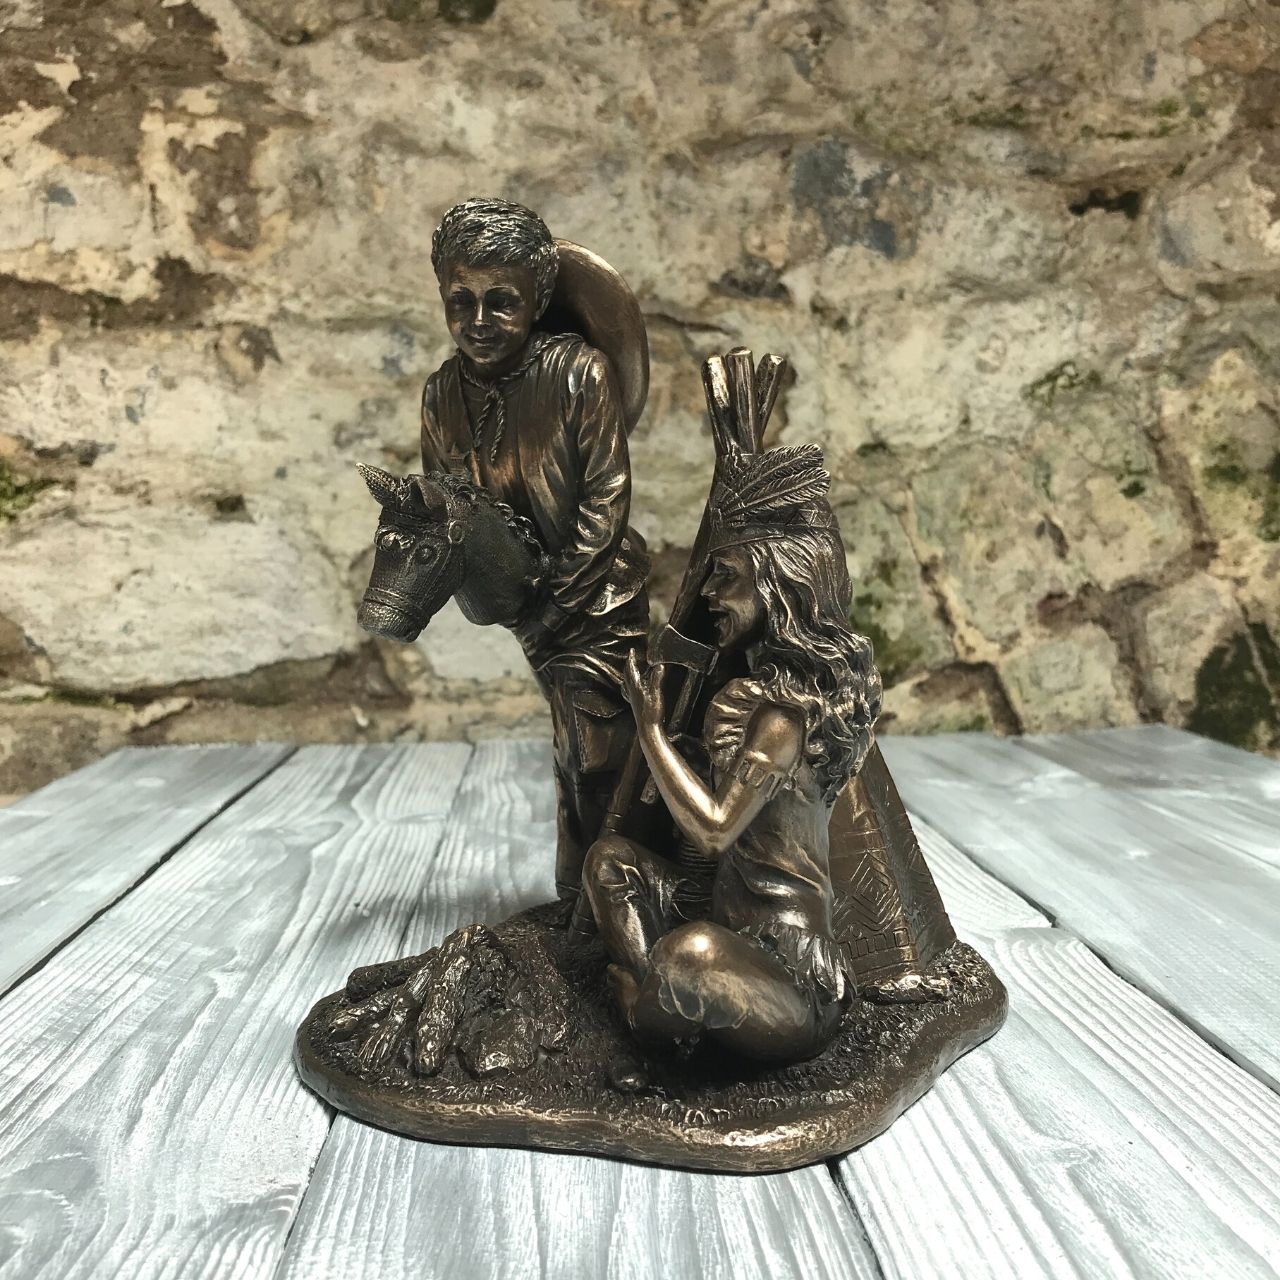 Genesis Cowboys & Indians  This cold cast bronze piece depicts two friends dressed up and playing cowboys and indians.  Genesis Fine Arts has evolved into a much loved and world famous Irish brand to produce a striking range of handcrafted cold cast bronze sculptures.